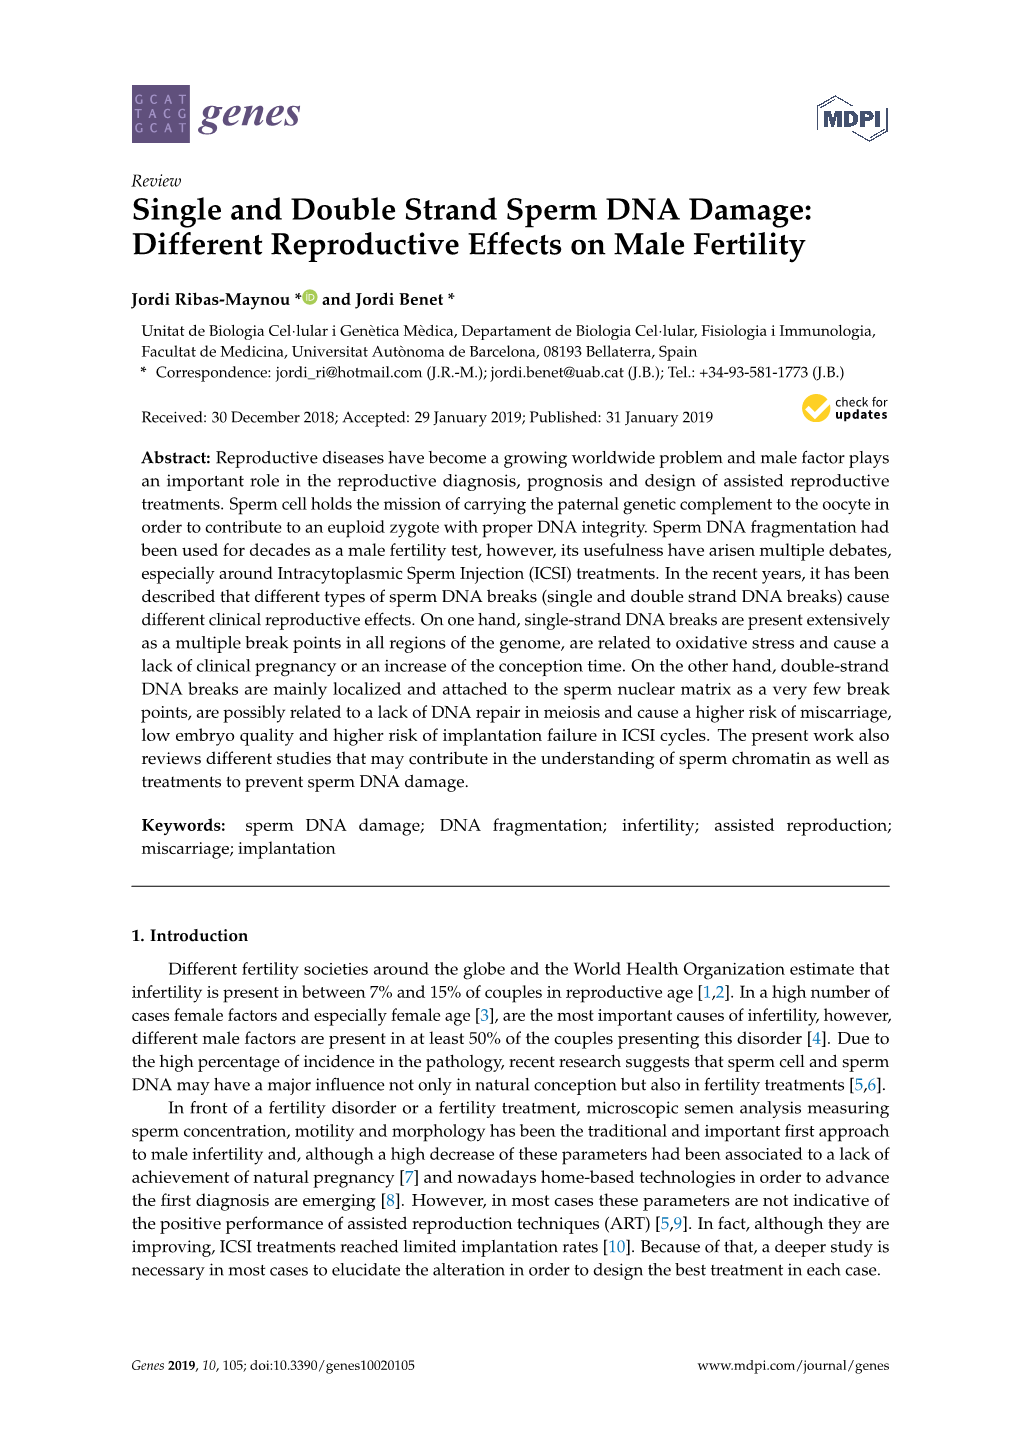 Single and Double Strand Sperm DNA Damage: Different Reproductive Effects on Male Fertility